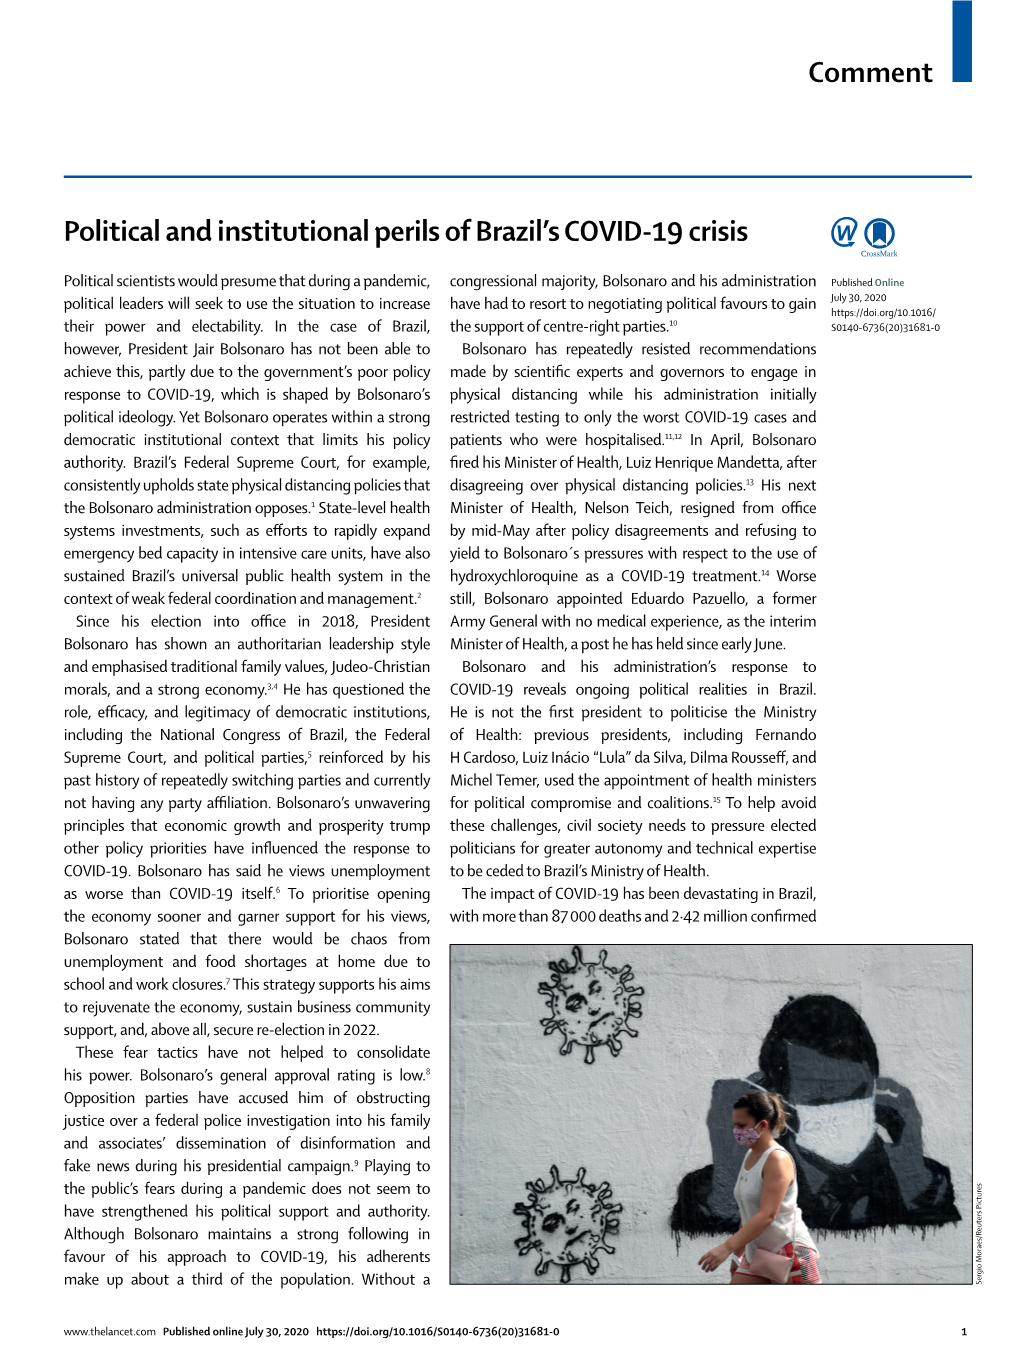 Political and Institutional Perils of Brazil's COVID-19 Crisis